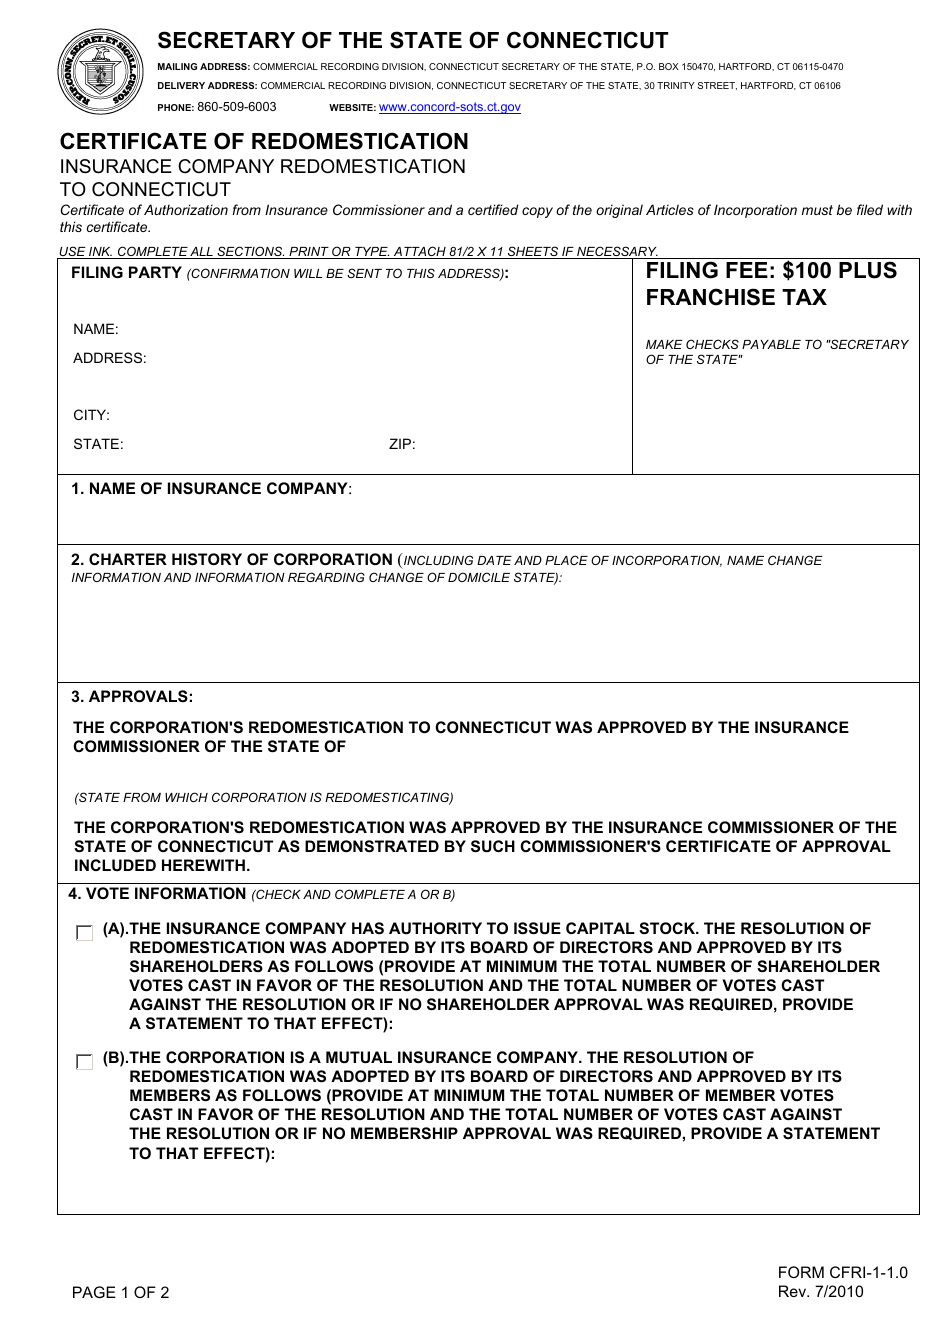 Form CFRI-1-1.0 Certificate of Redomestication - Insurance Company Redomestication to Connecticut - Connecticut, Page 1